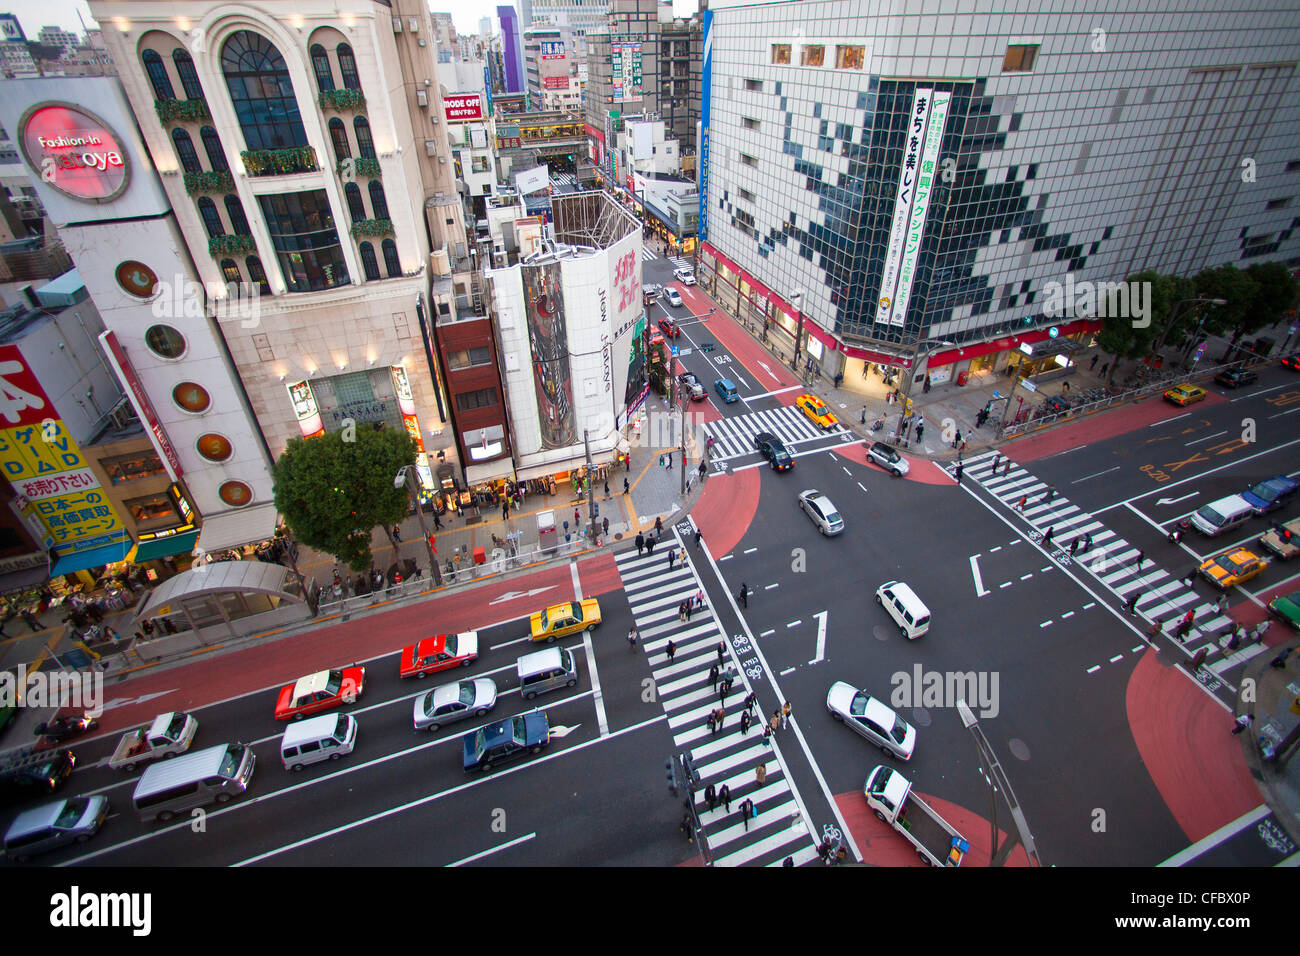 Japan, Asia, Tokyo, city, Ueno, District, Okachimachi, Area, bright, colourful, crossing, lights, modern, new, road, shopping, t Stock Photo